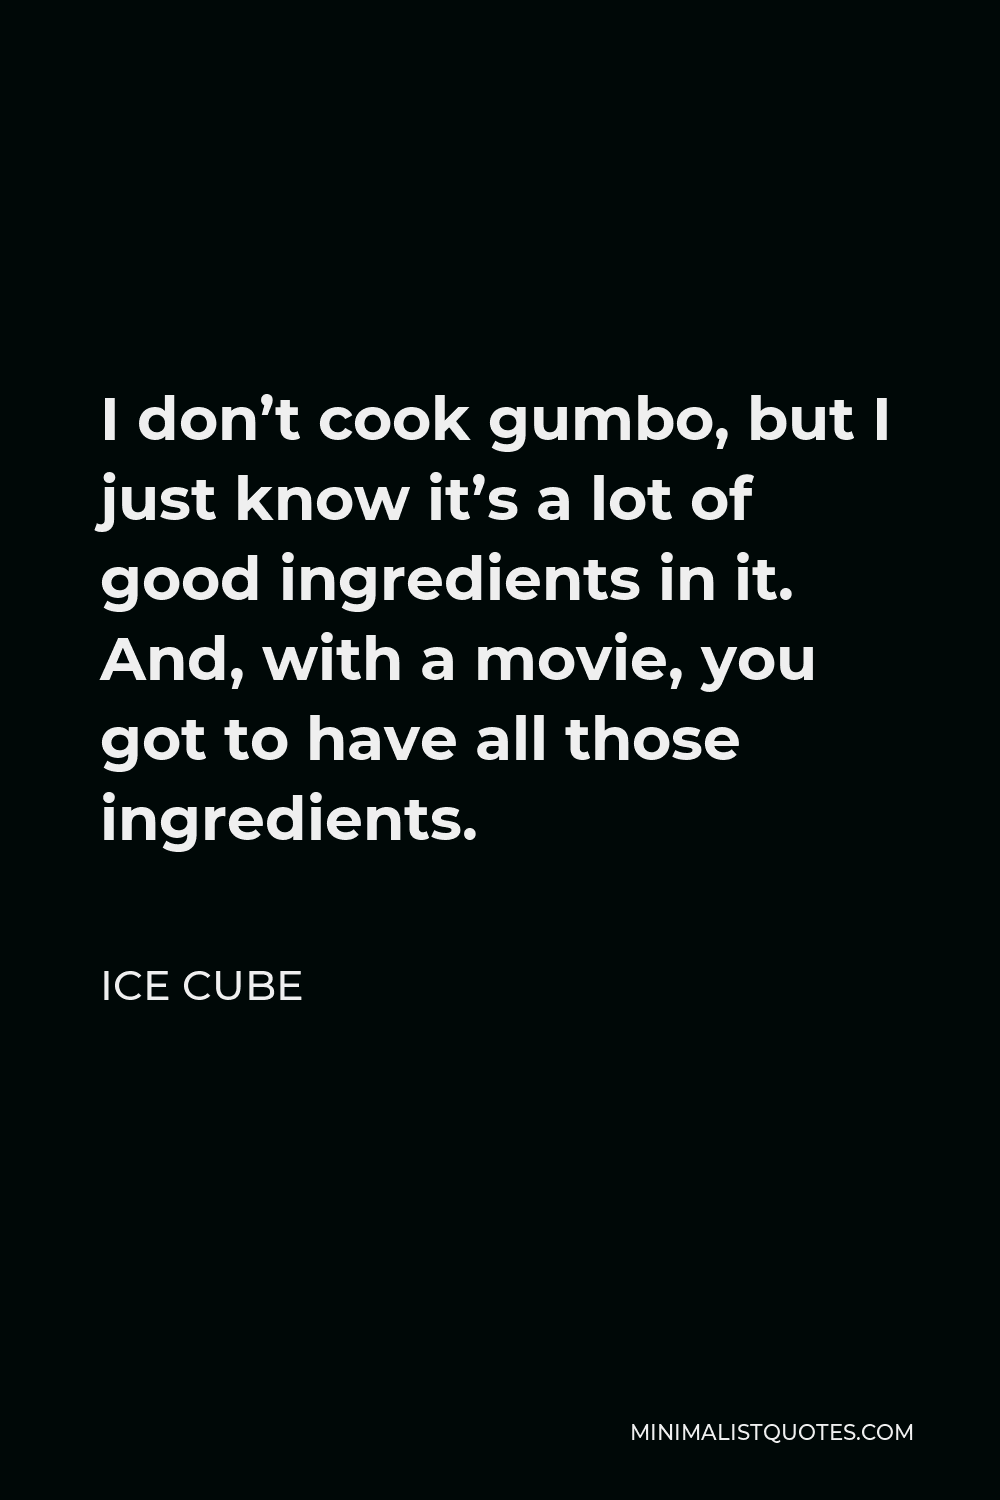 Ice Cube Quote - I don’t cook gumbo, but I just know it’s a lot of good ingredients in it. And, with a movie, you got to have all those ingredients.